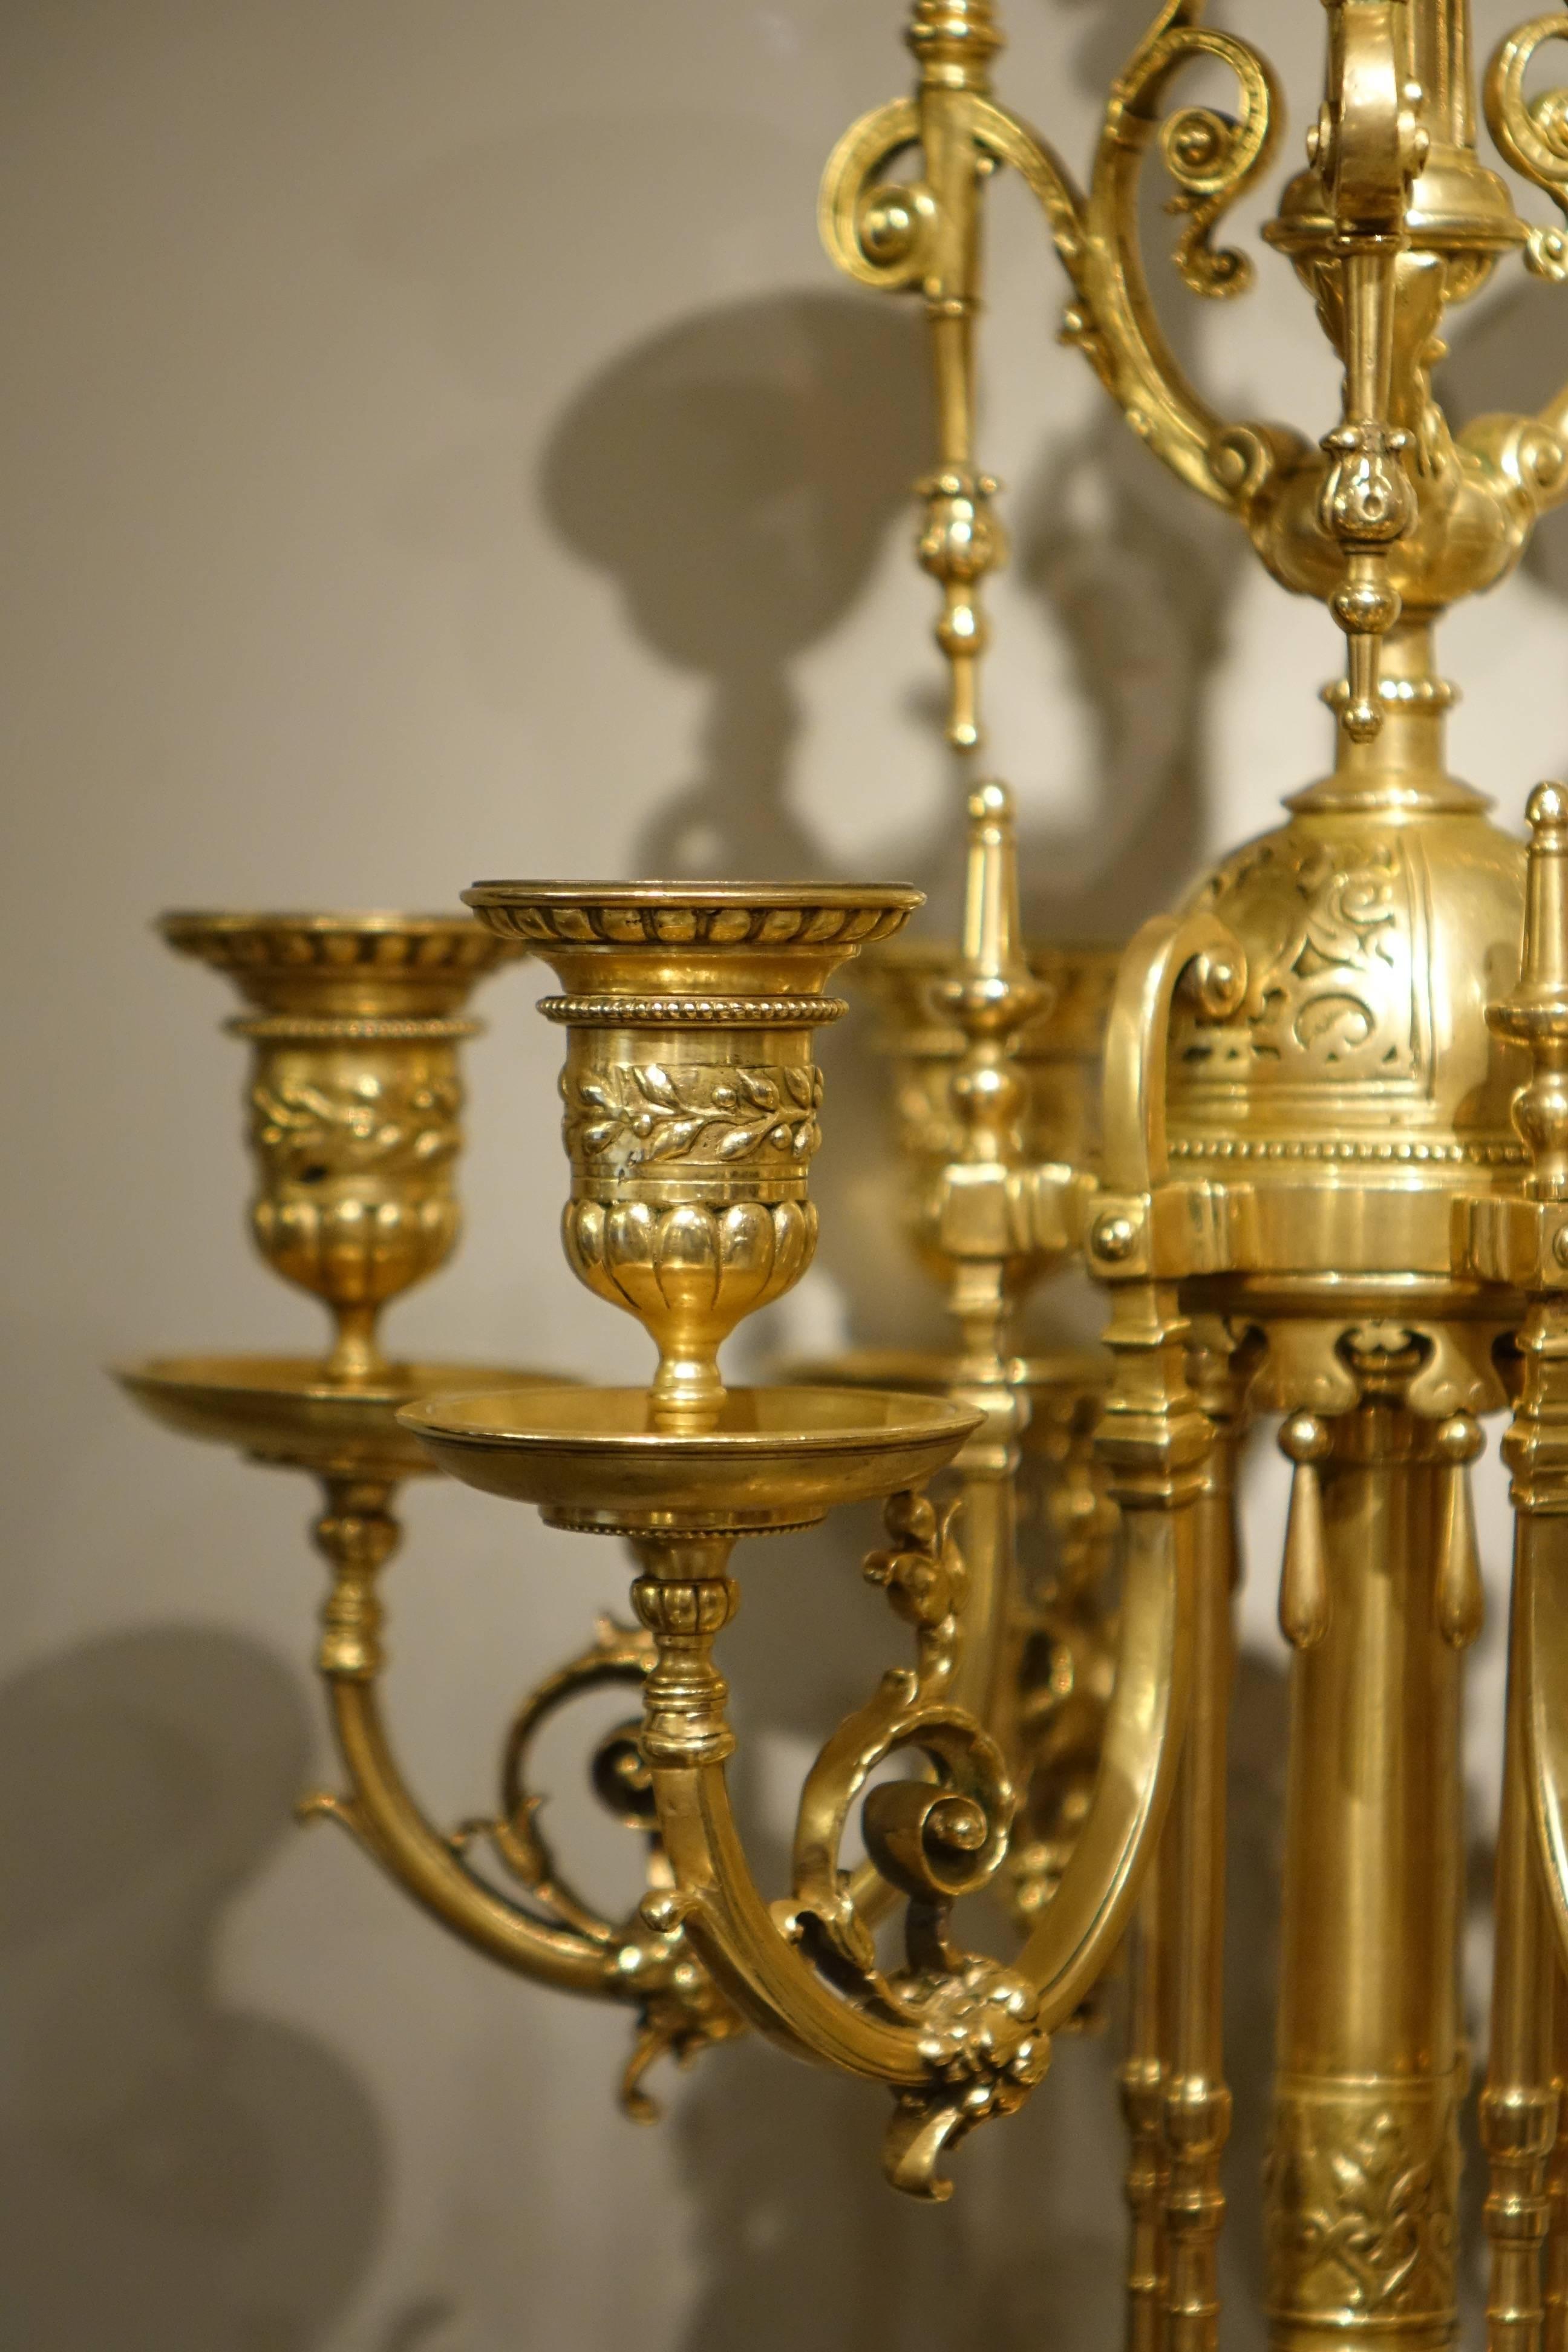 Cast Pair of Important Gilt Bronze Candelabras in Neo-Renaissance Style, circa 1860 For Sale